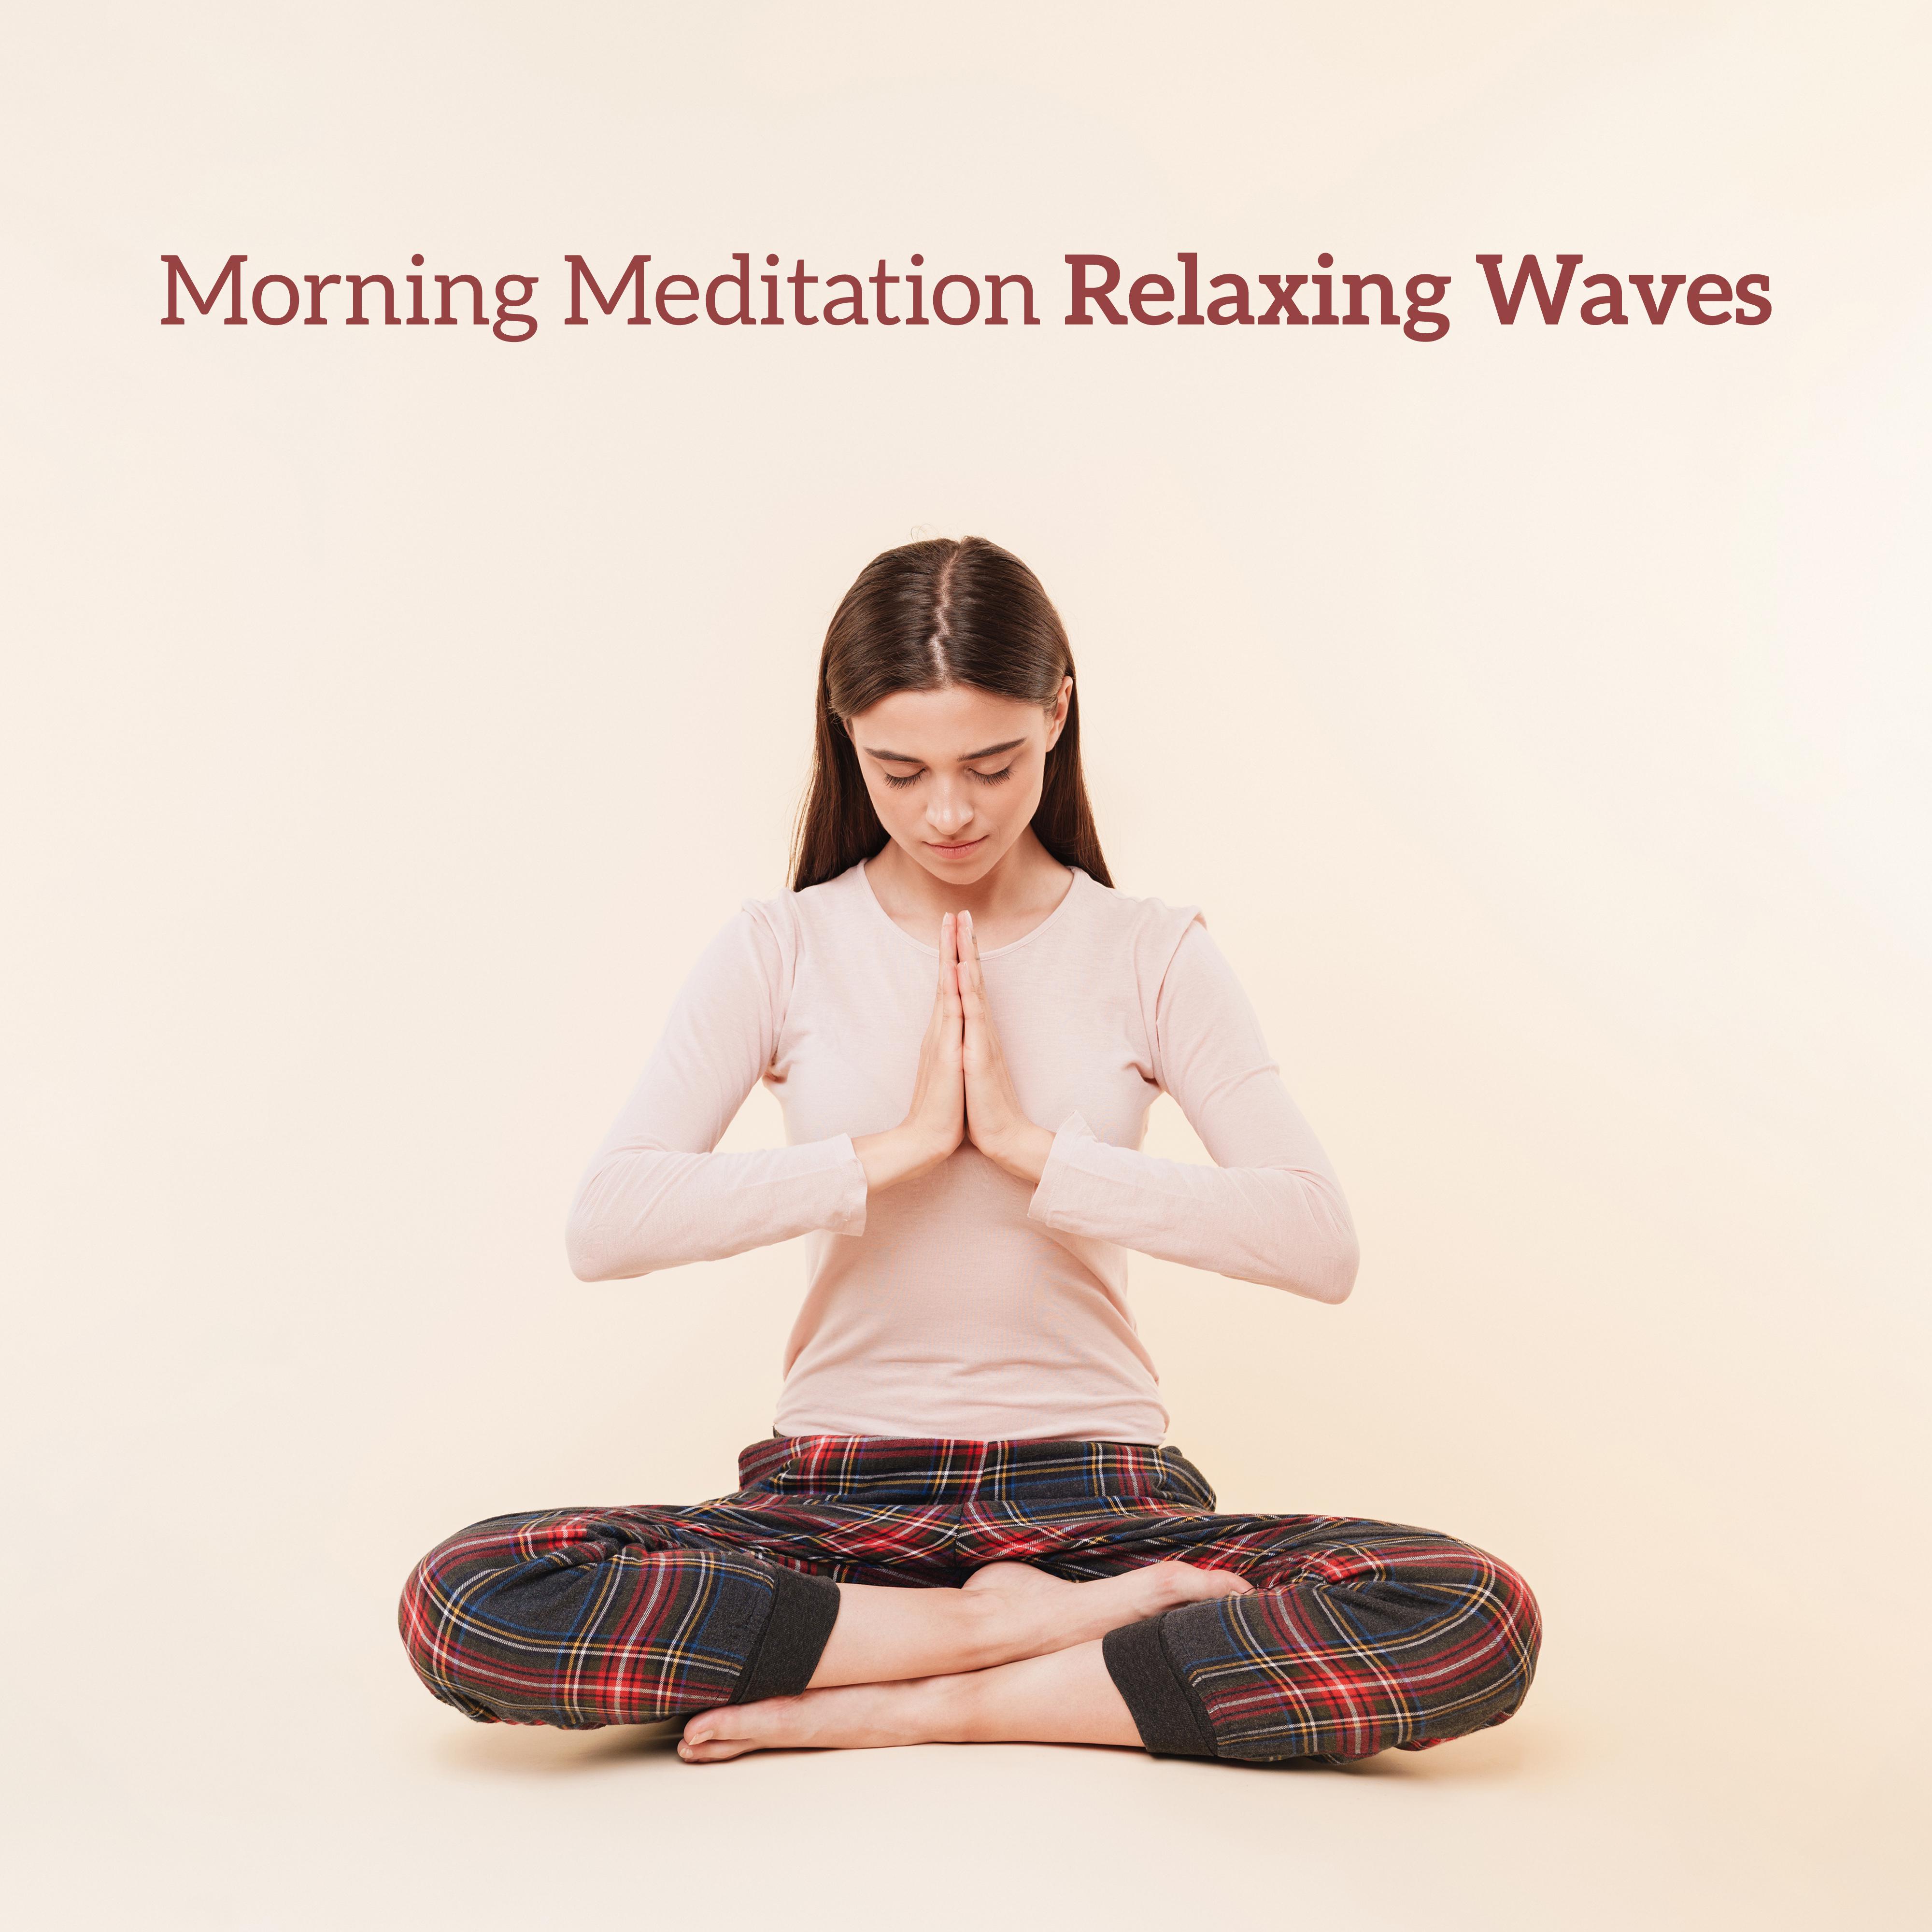 Morning Meditation Relaxing Waves: New Age 2019 Music for Perfect Morning Yoga Routine, Start a Day Full of Energy